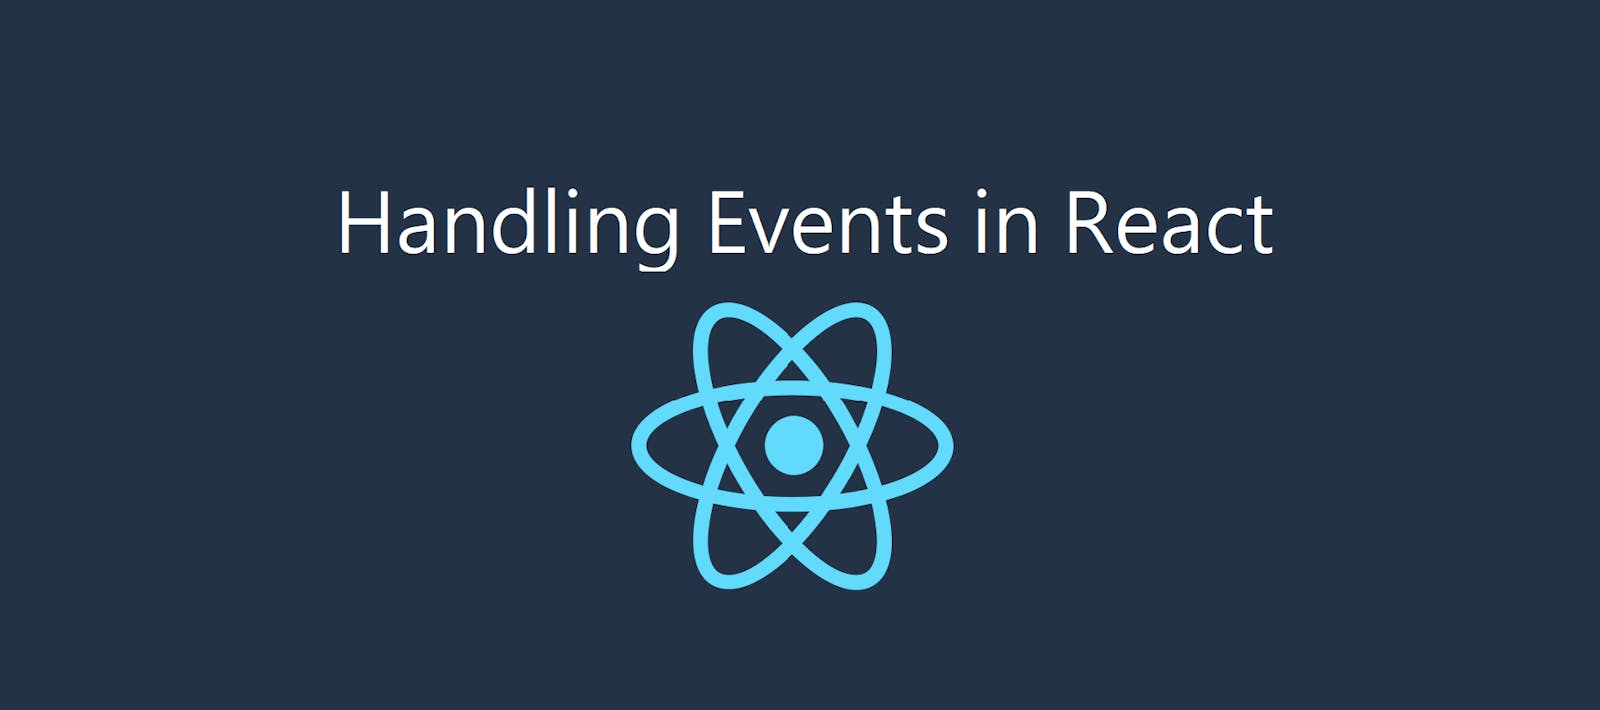 Day 6: Handling Events in React